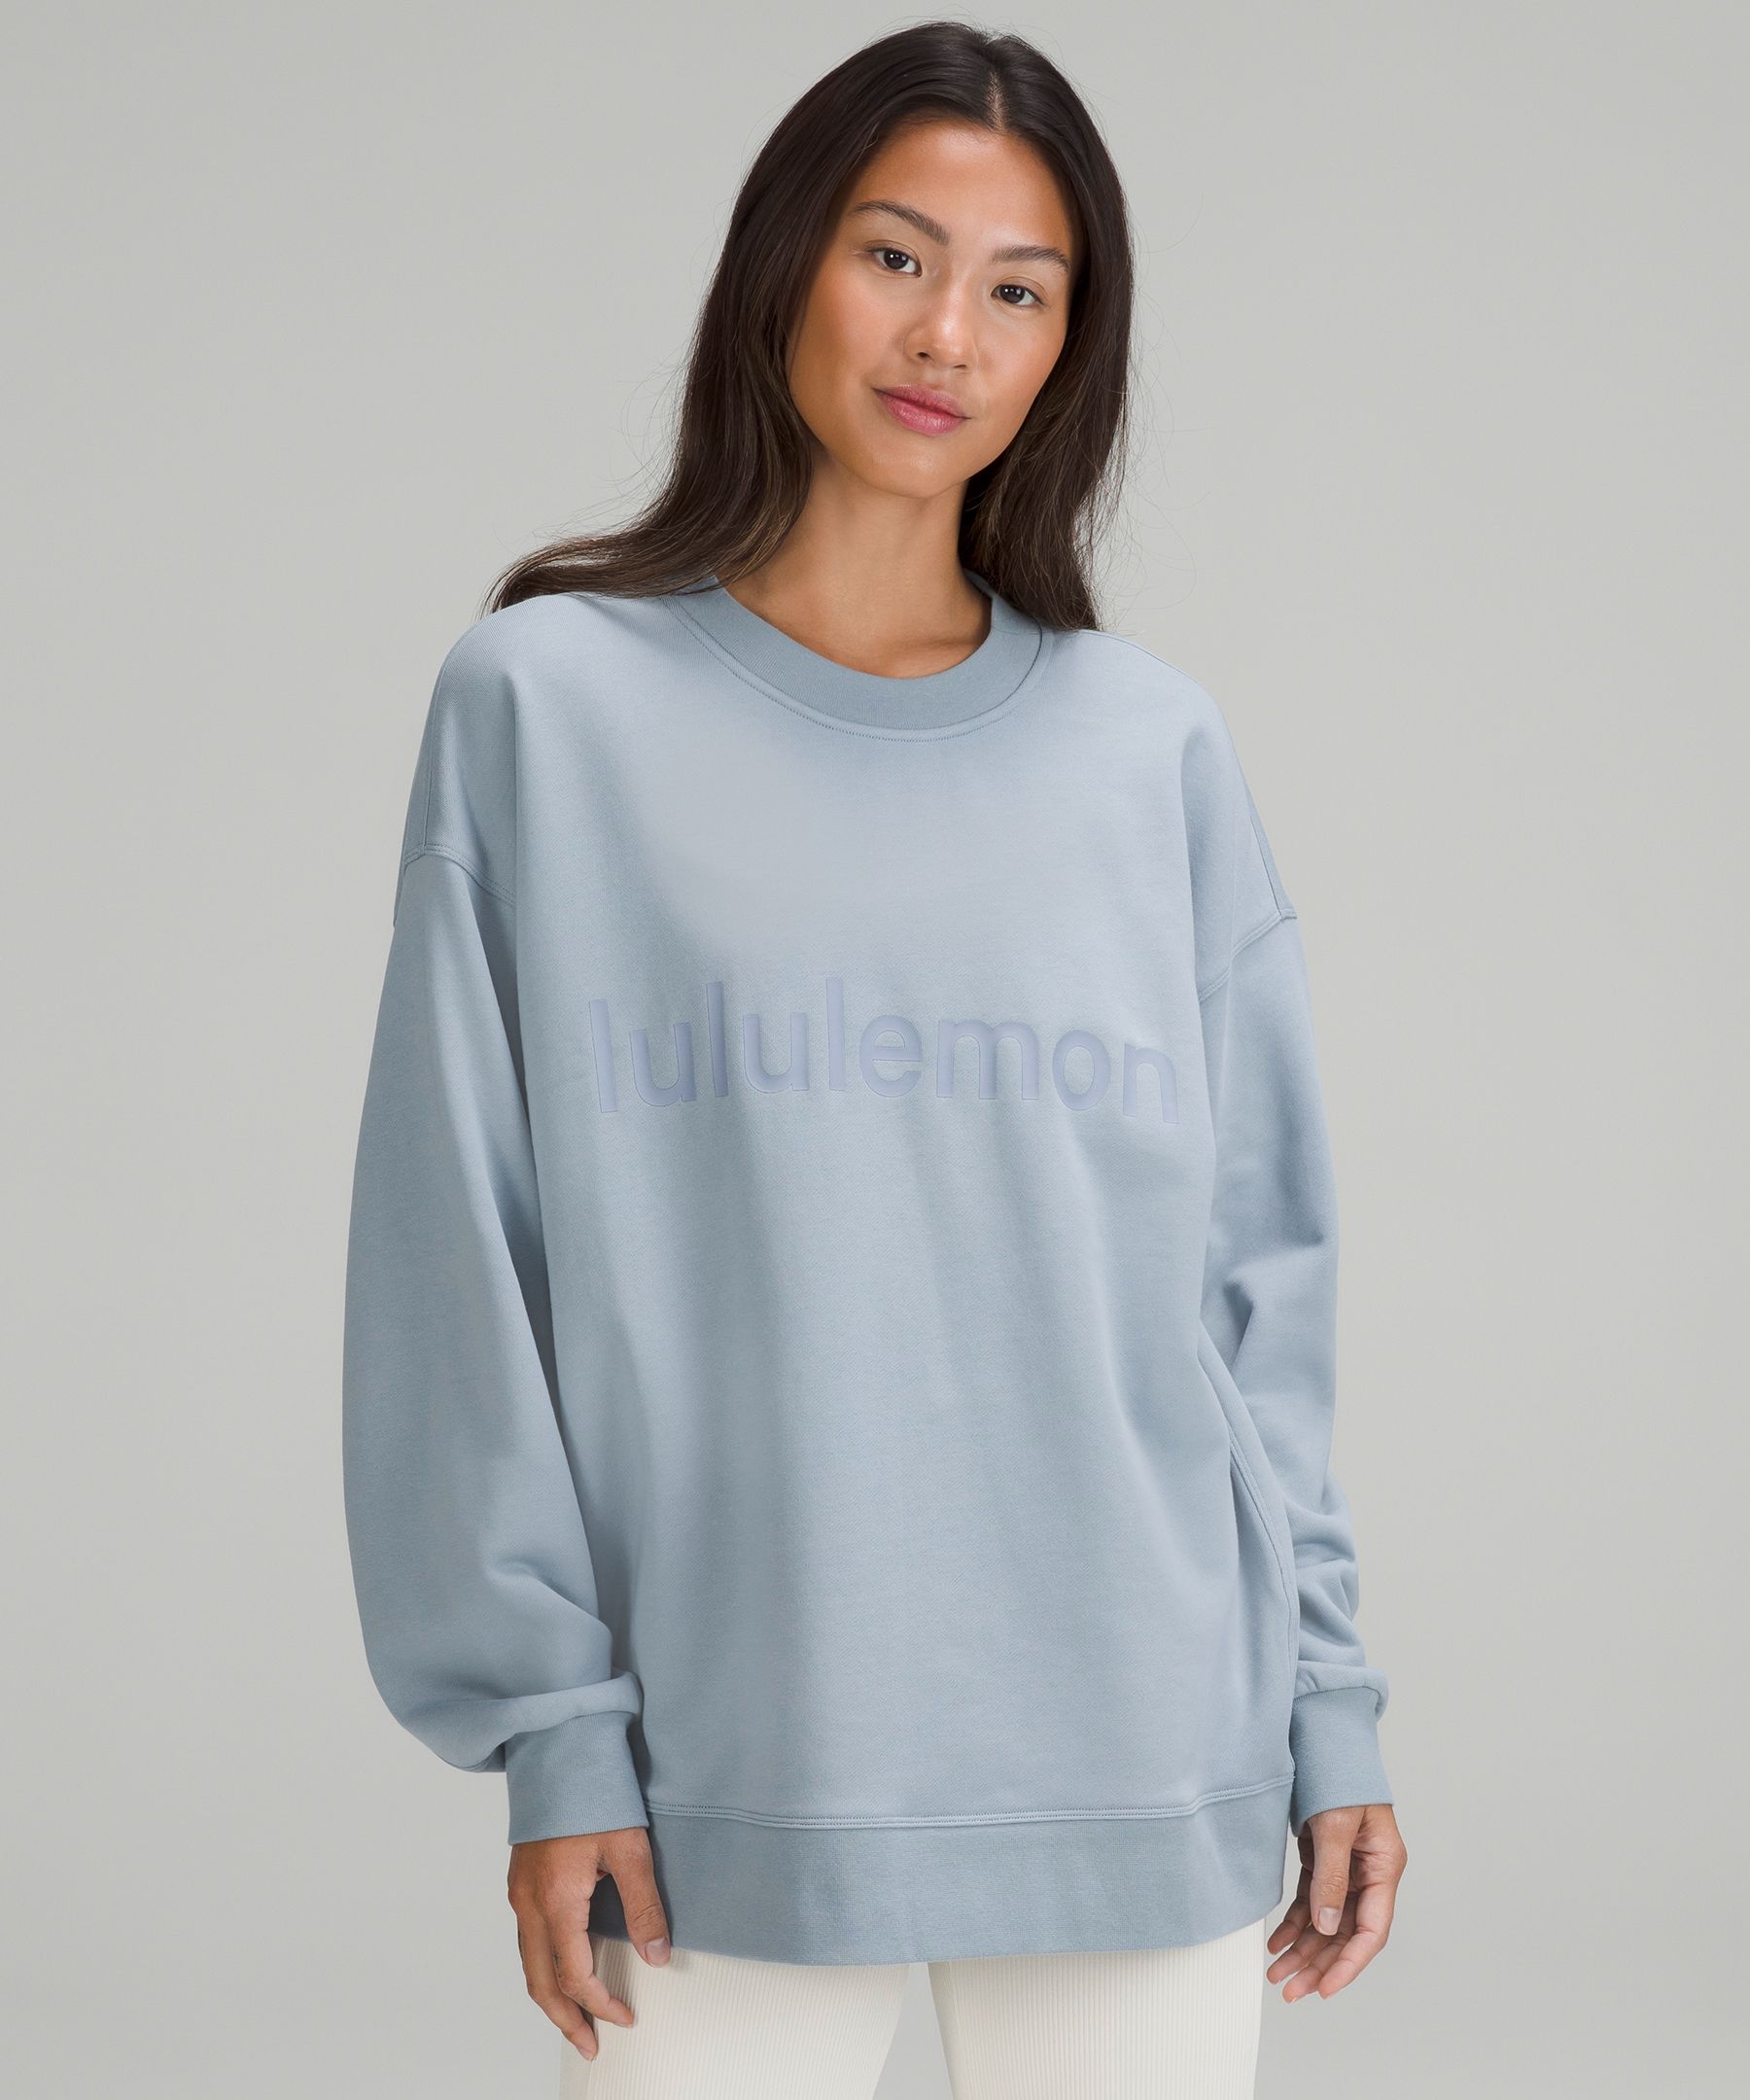 Lululemon Perfectly Oversized Crew Graphic In Blue